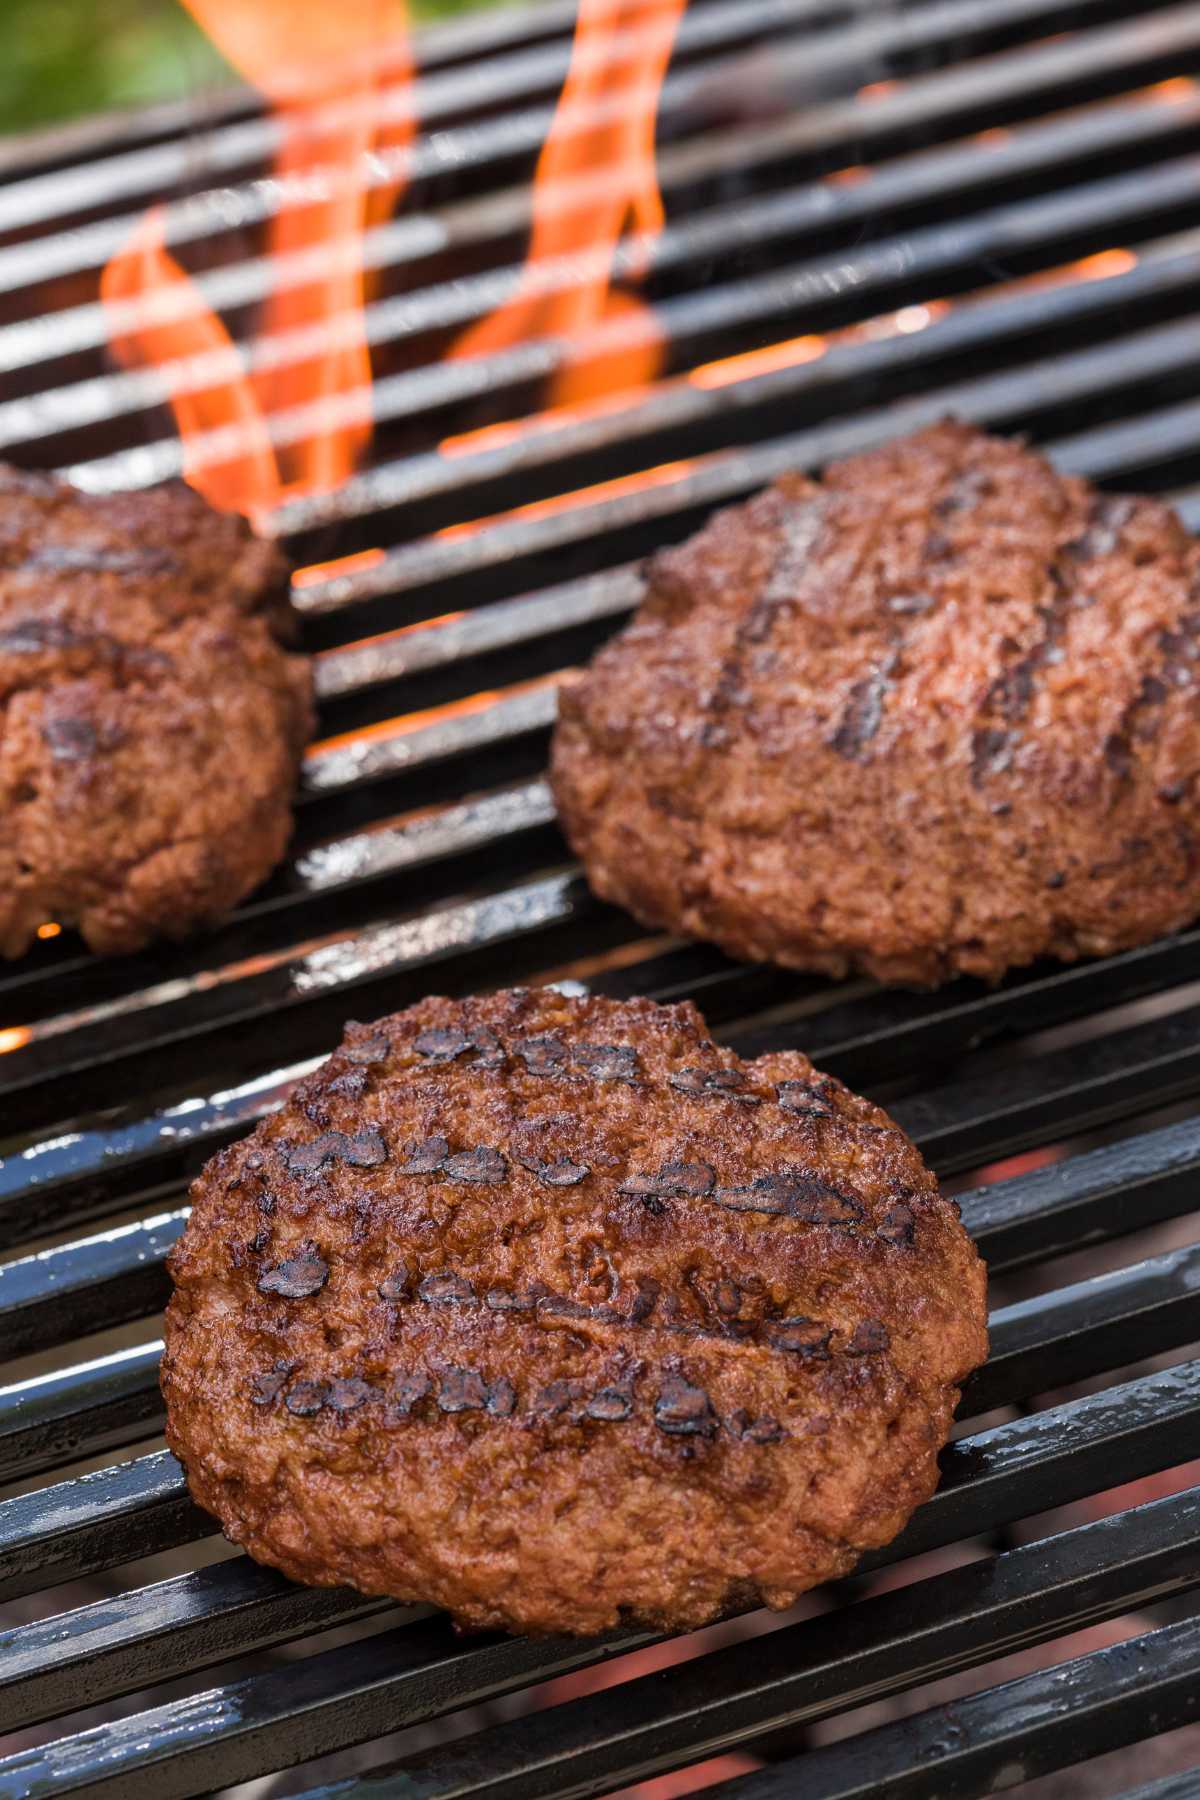 Ever wonder what’s the best grill temp for burgers? Summer's around the corner and it's time to dust off that grill. There are a few things you can do to make sure your burgers turn out as tasty and juicy as possible this summer.